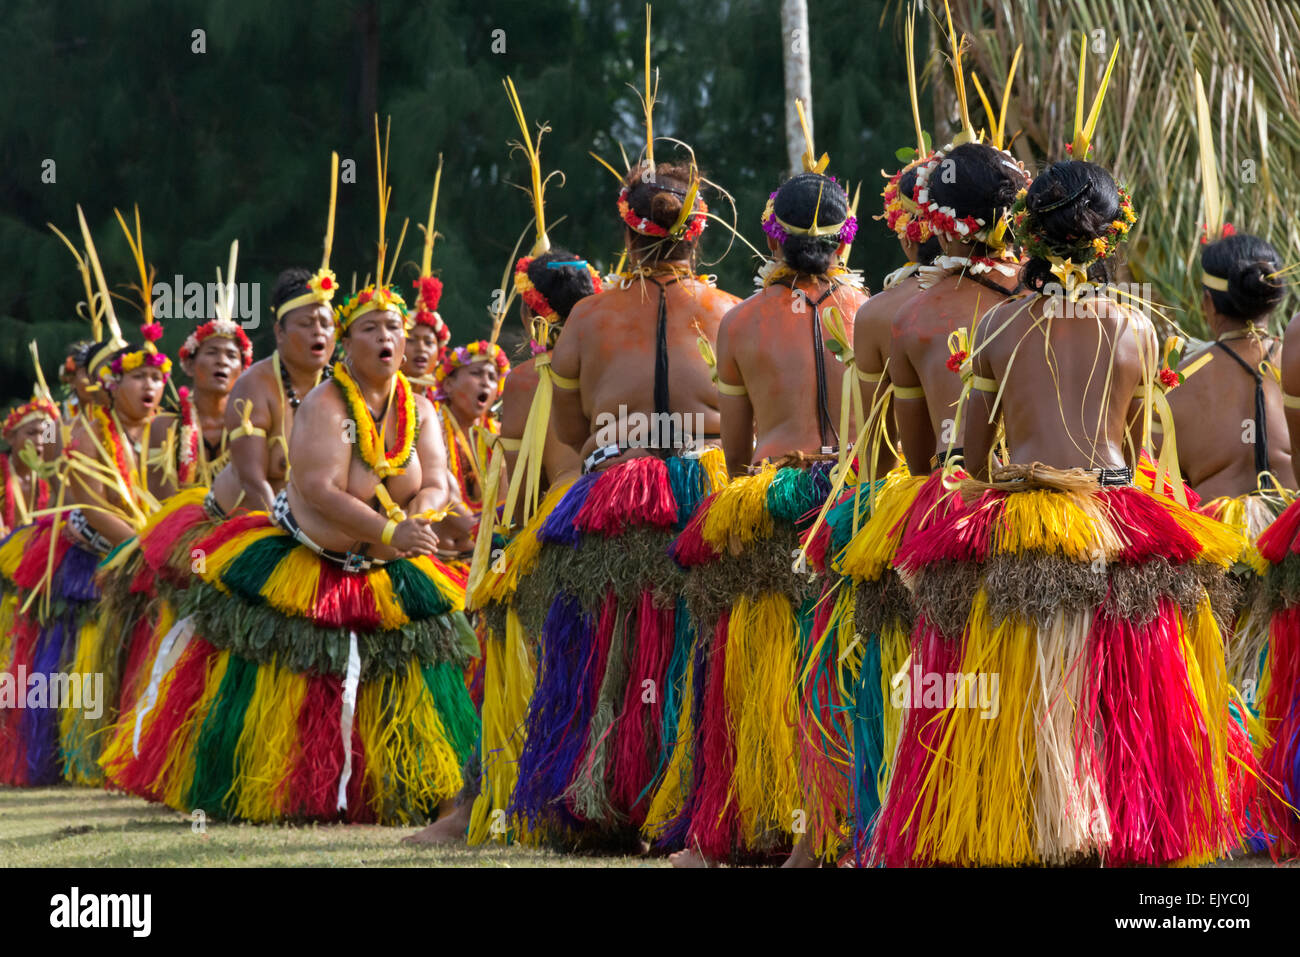 Yapese women in traditional clothing dancing at Yap Day Festival, Yap Island, Federated States of Micronesia Stock Photo